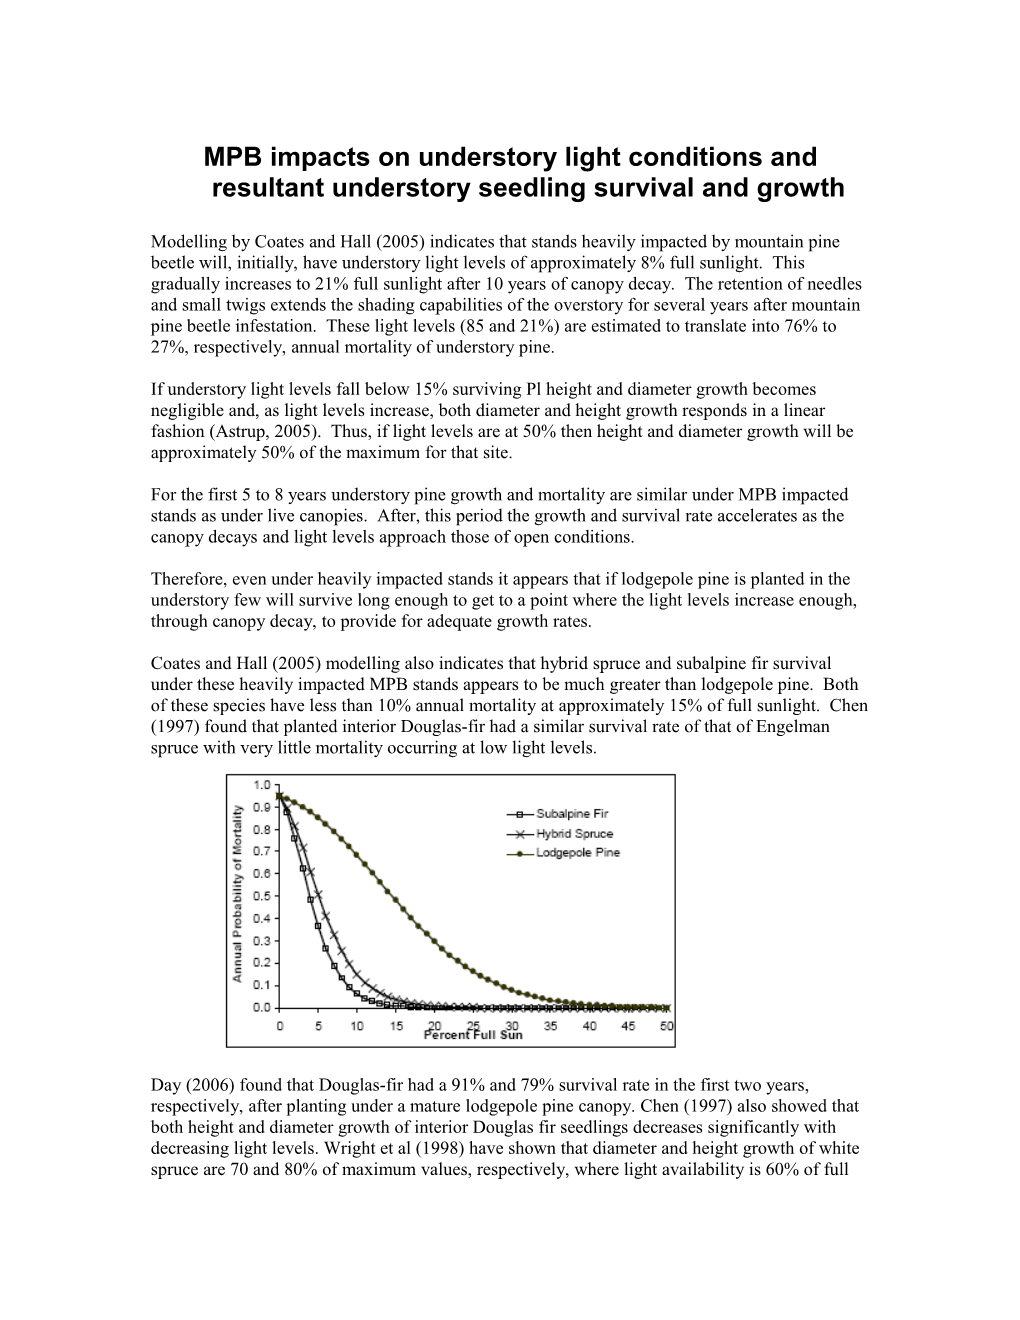 MPB Impacts on Understory Light Conditions and Resultant Understory Seedling Survival and Growth